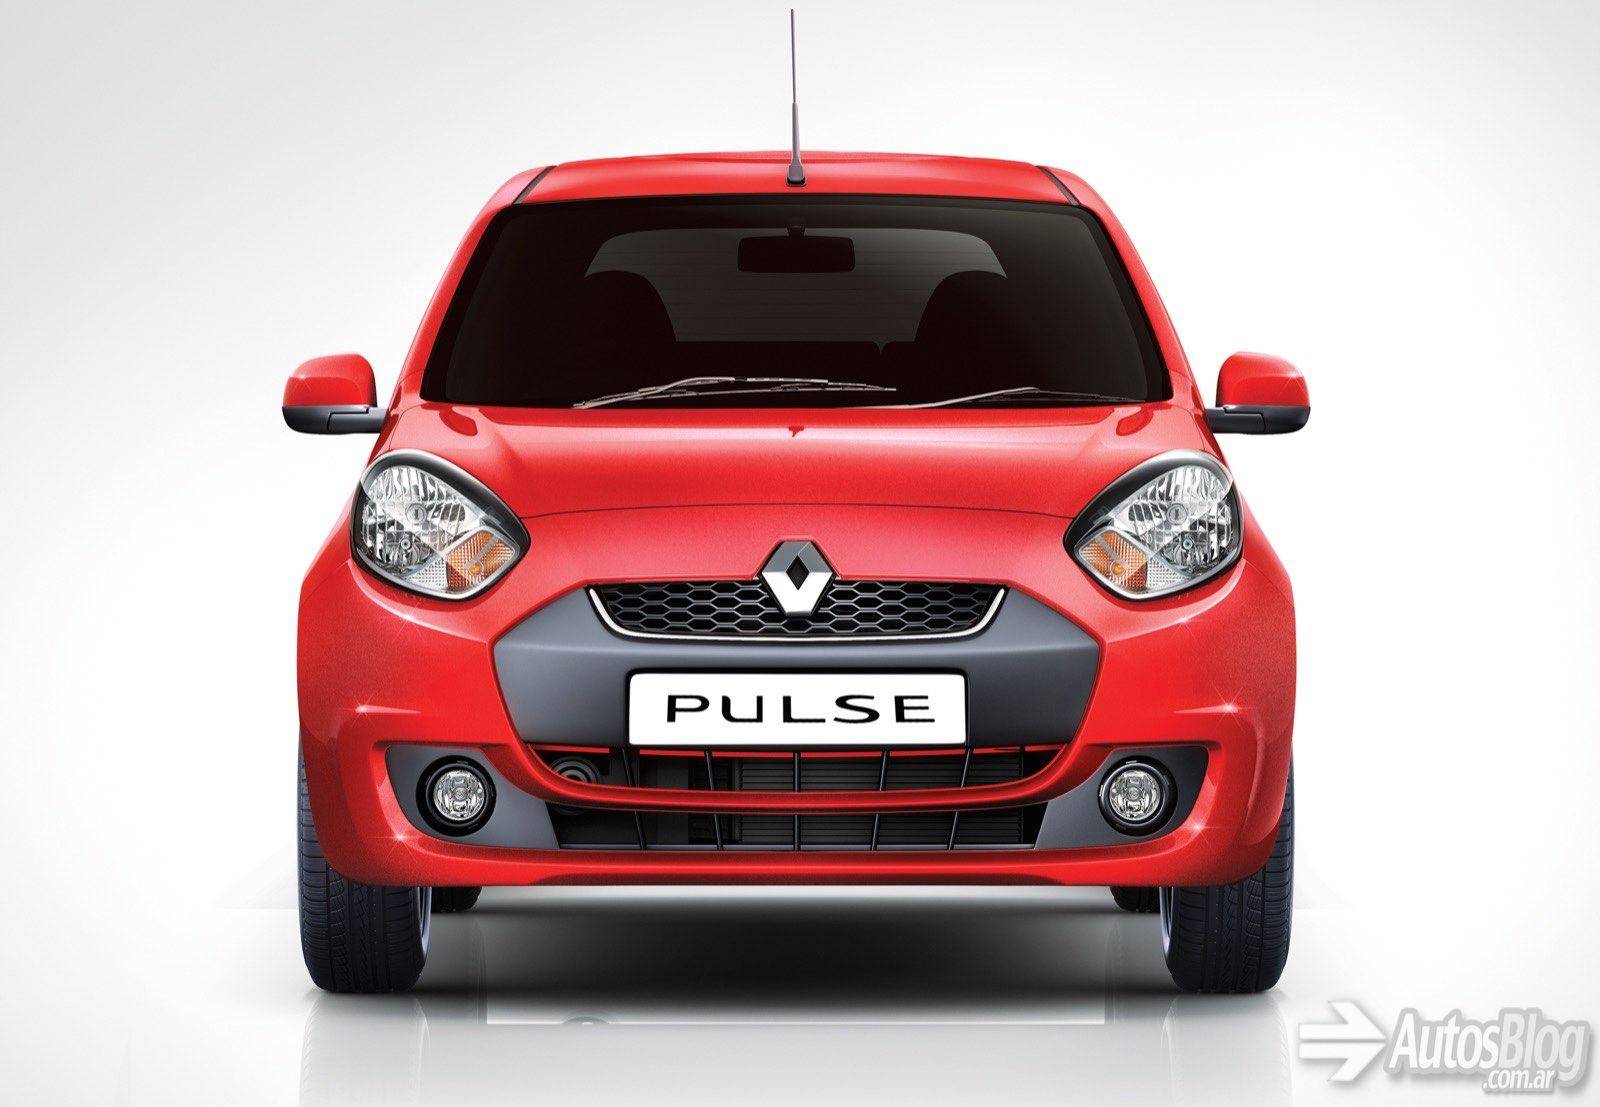 Renault ваз. Renault Pulse. Рено ВАЗ. Renault India private Limited. Ampere Renault.